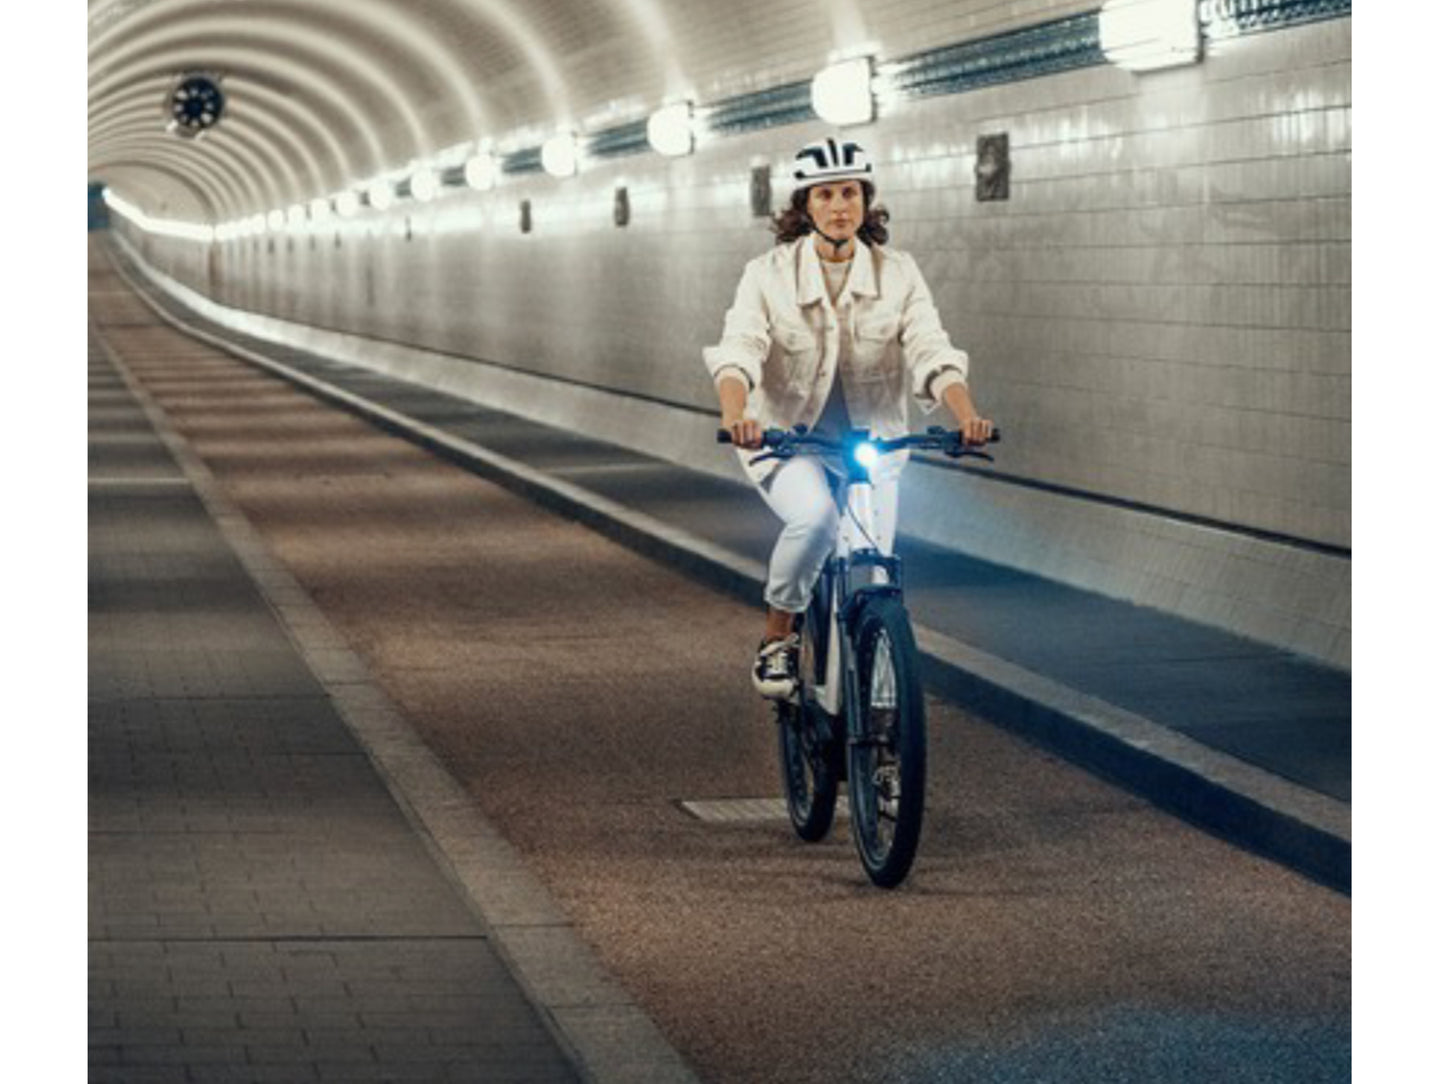 Riese and Muller Nevo GT Rohloff HS emtb hardtail woman riding on city tunnel bike path headlight on